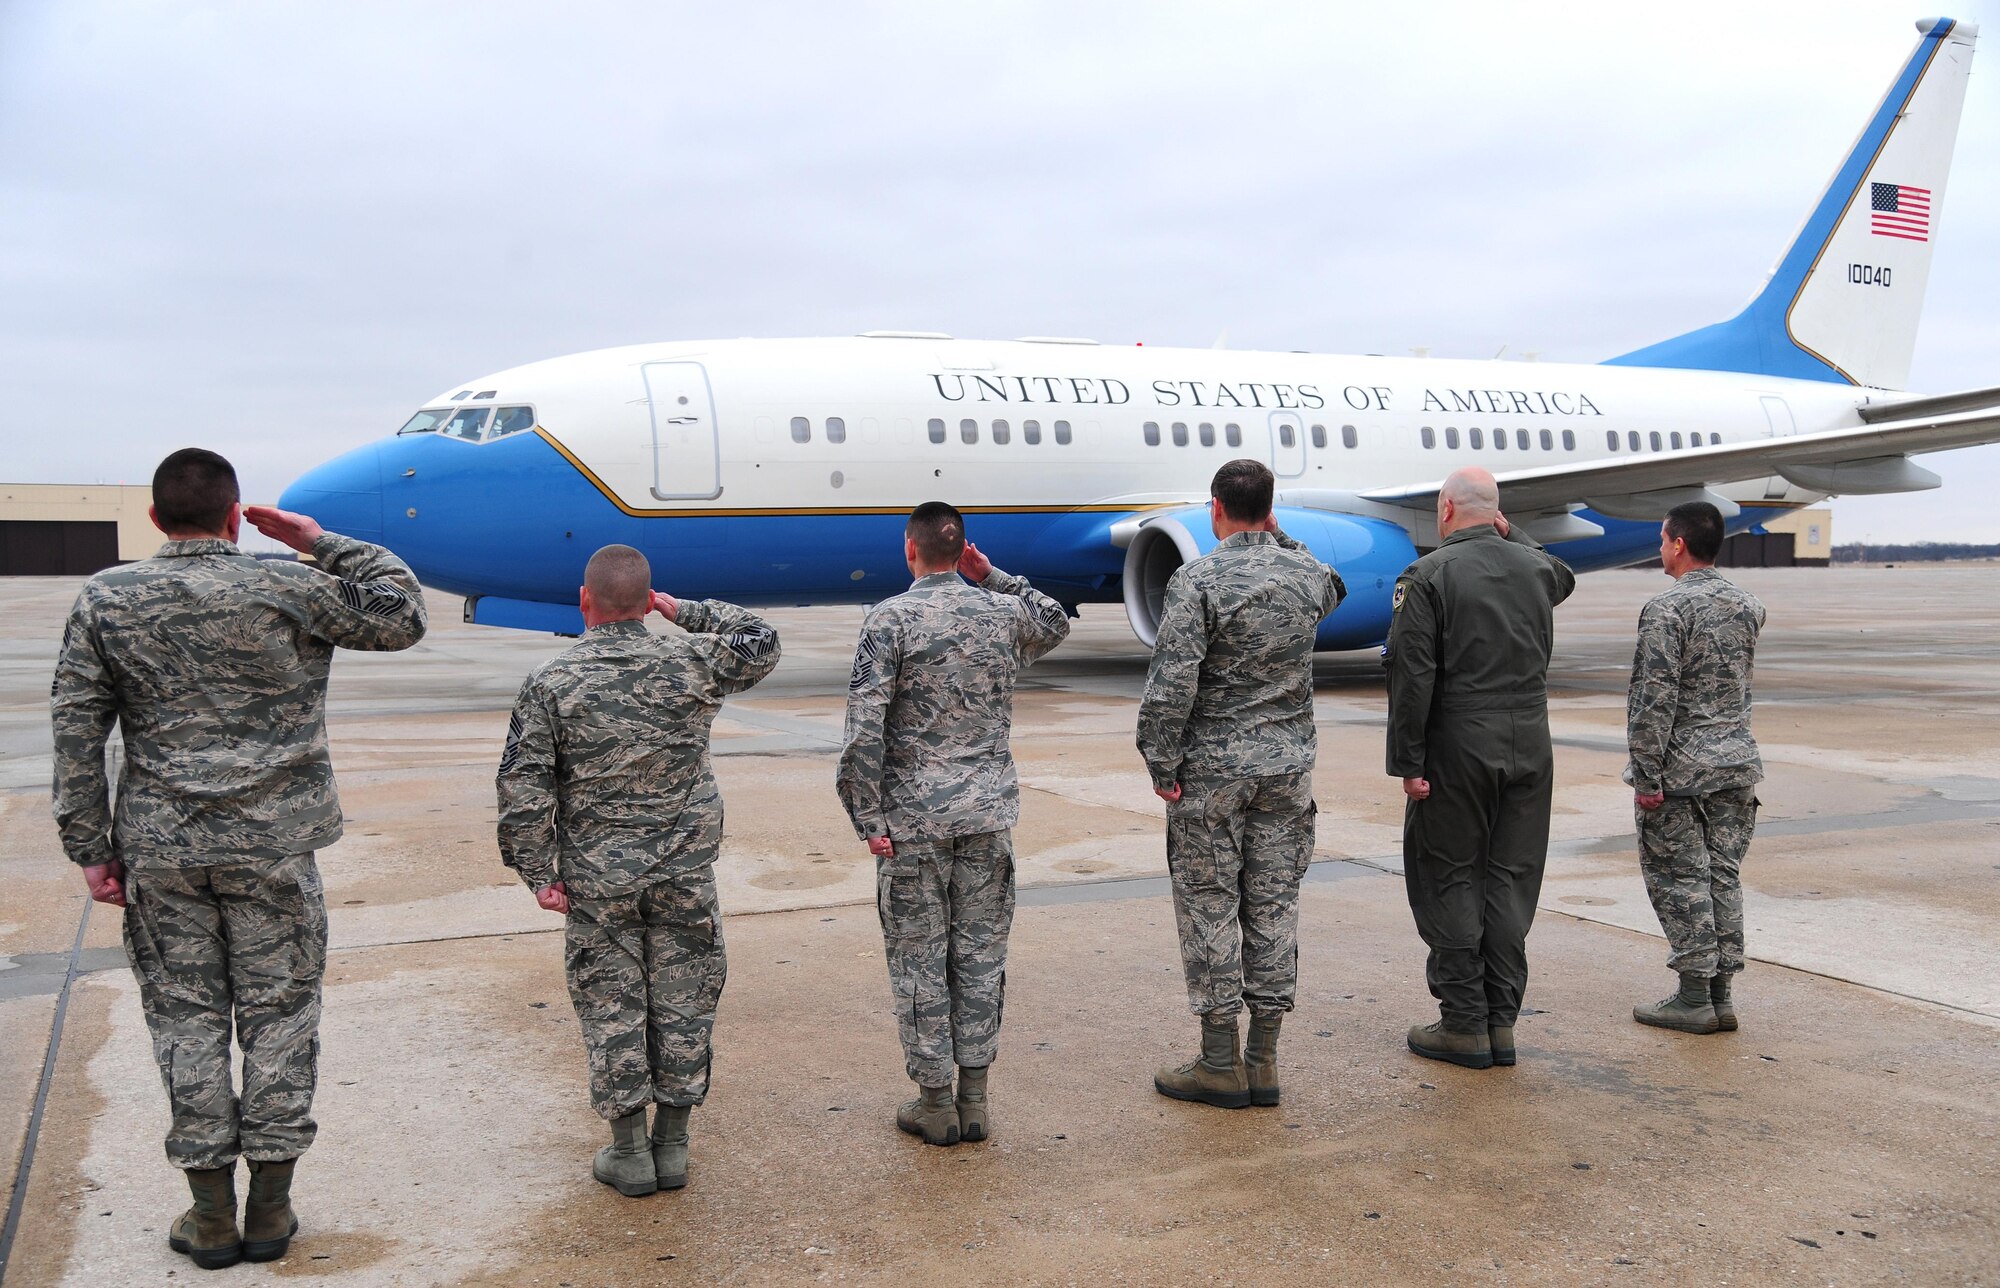 Leadership from Whiteman Air Force Base, Mo., salutes during the arrival of the Air Force Chief of Staff, Gen. Mark A. Welsh III, Feb. 16, 2016. Welsh met with Airmen leadership from the 509th and 131st Bomb Wings as well as the 442d Fighter Wing to discuss the importance of Total Force Integration (U.S. Air Force photo by Senior Airman Joel Pfiester)